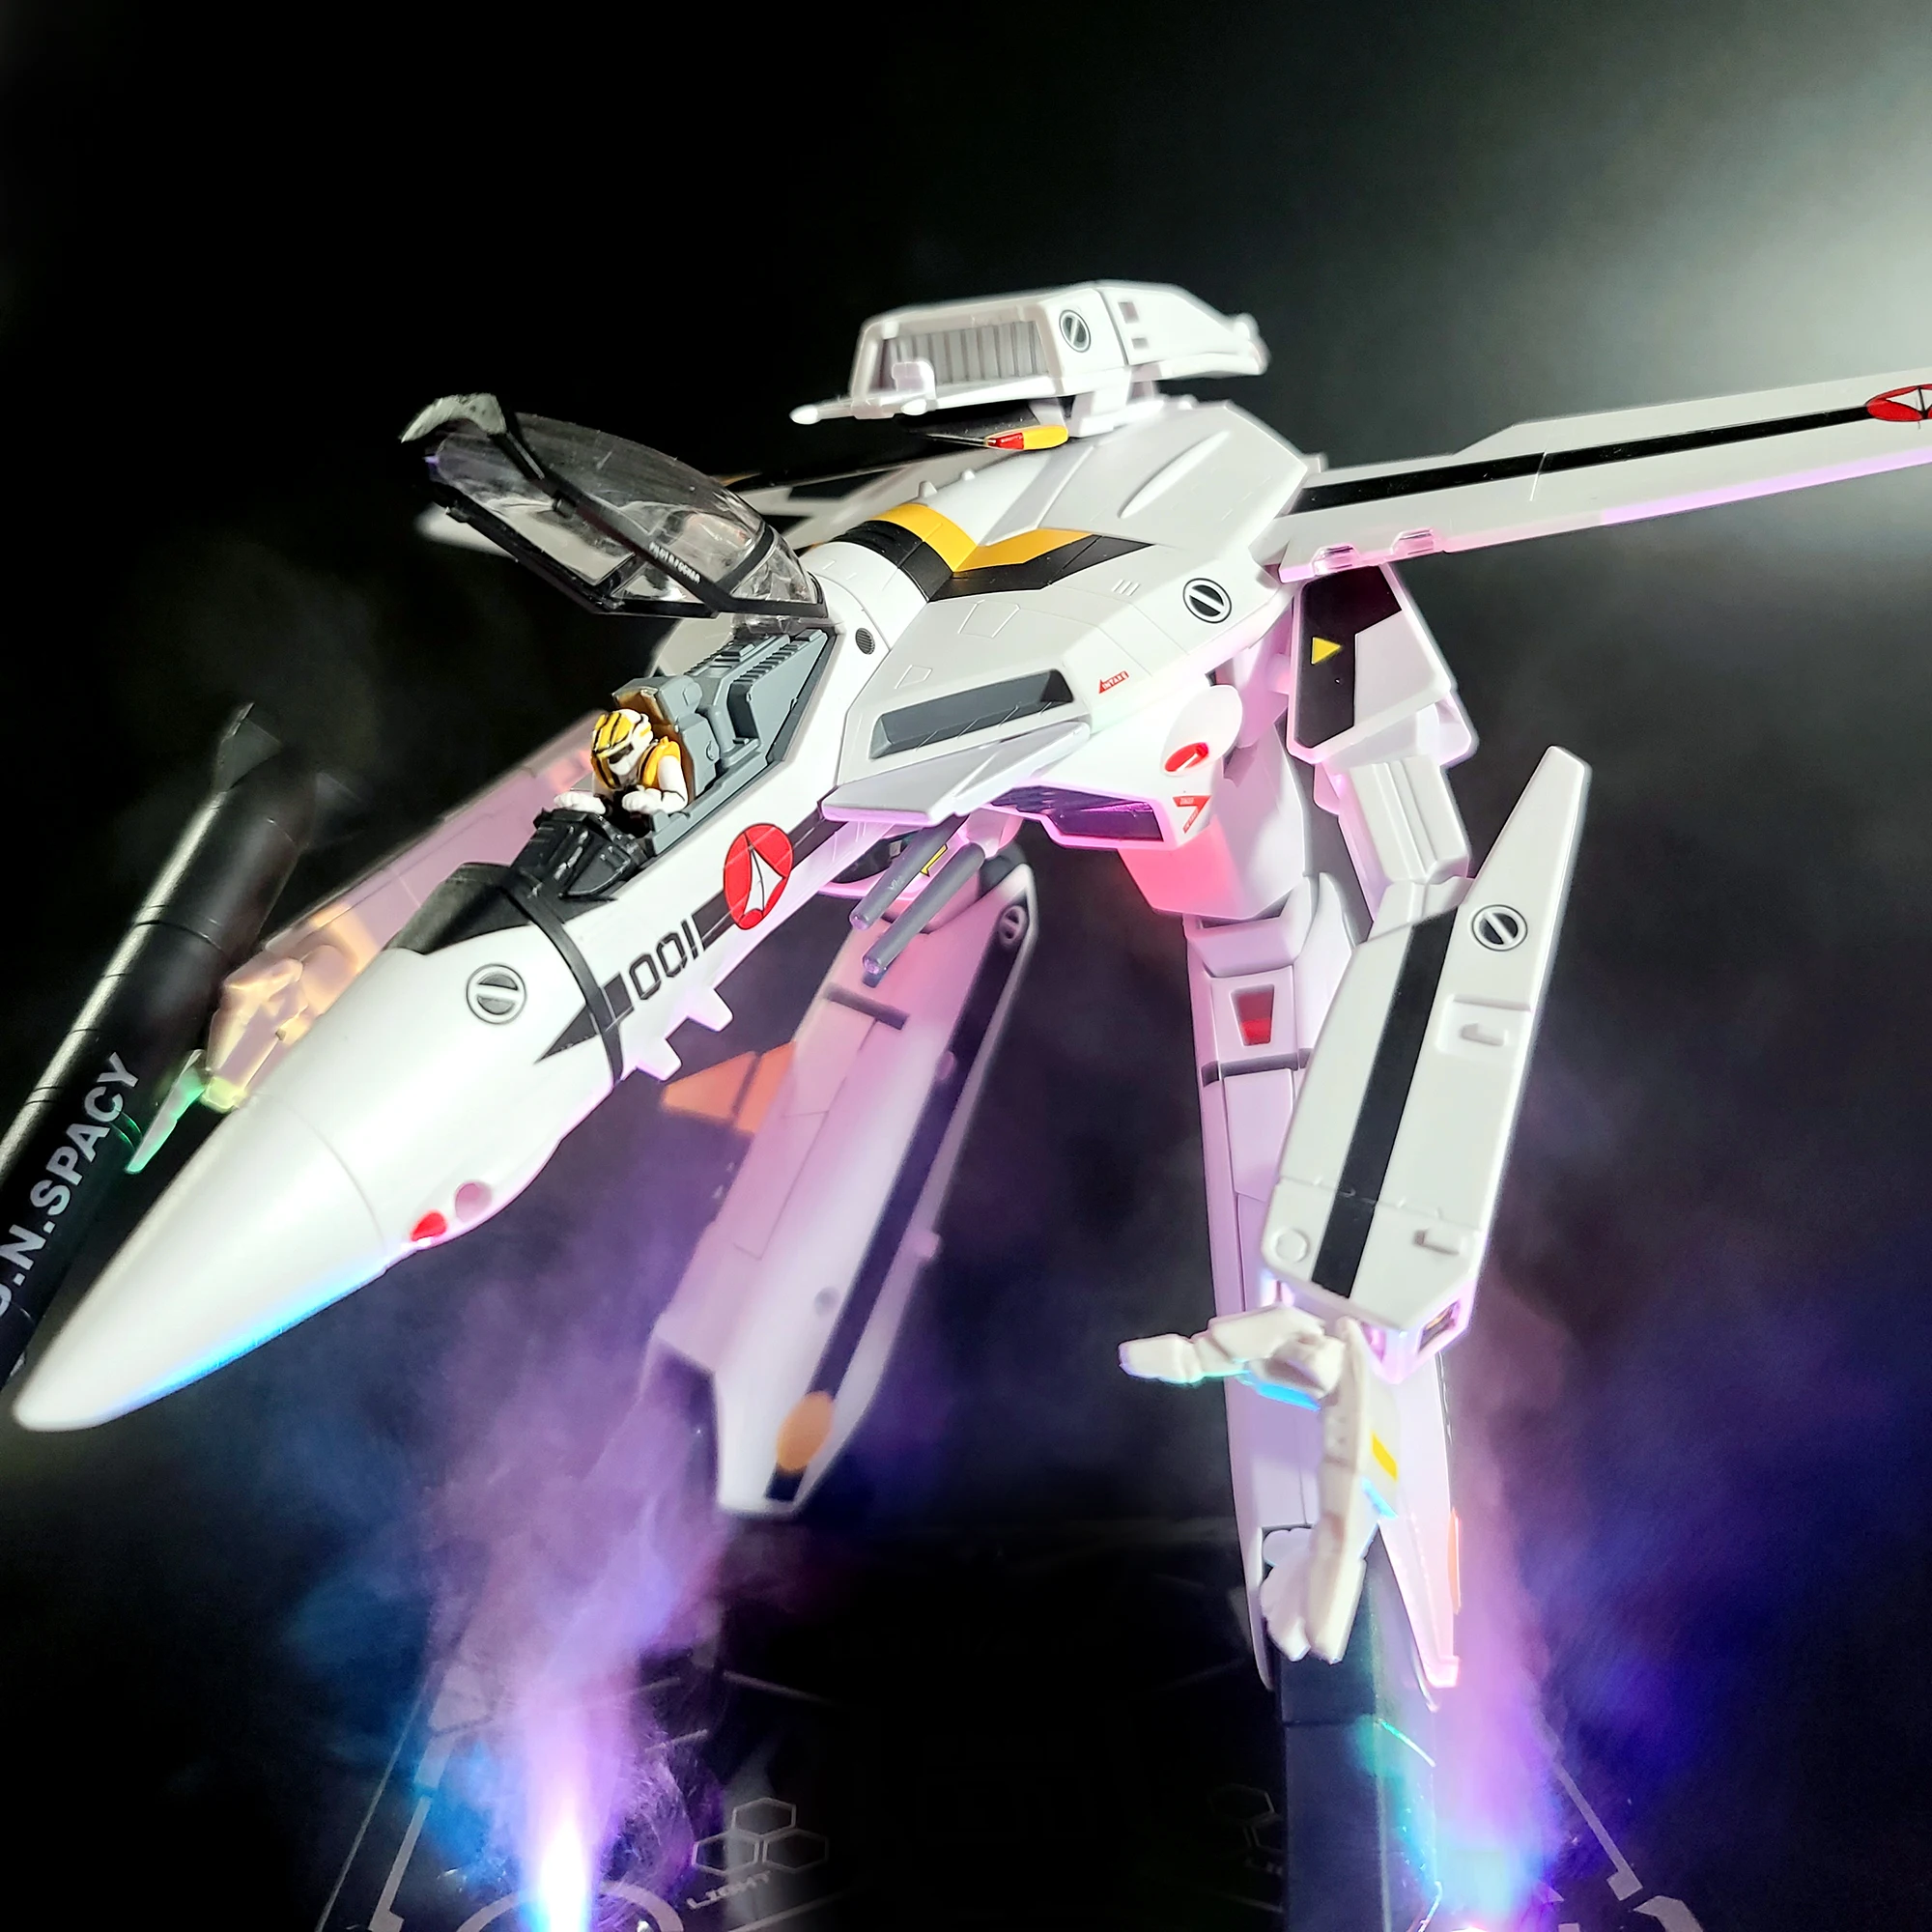 Macross Robotech 1/60 VF-1S Super Valkyrie Skeleton Machine Three-stage Deformation Action Toy Gift Collection Hobby